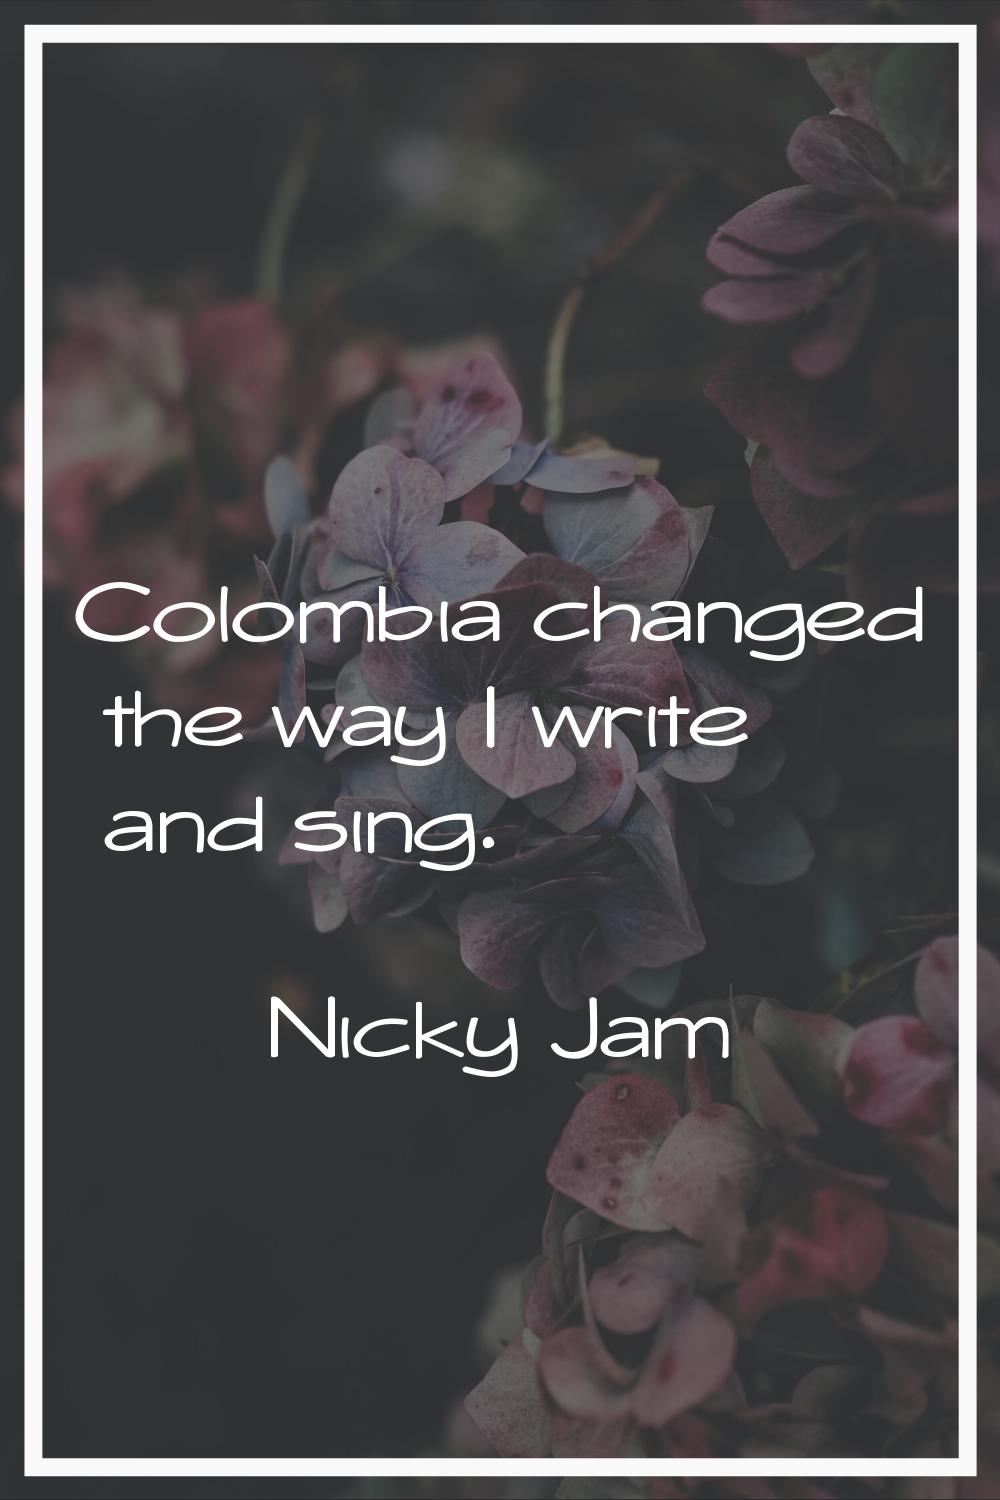 Colombia changed the way I write and sing.